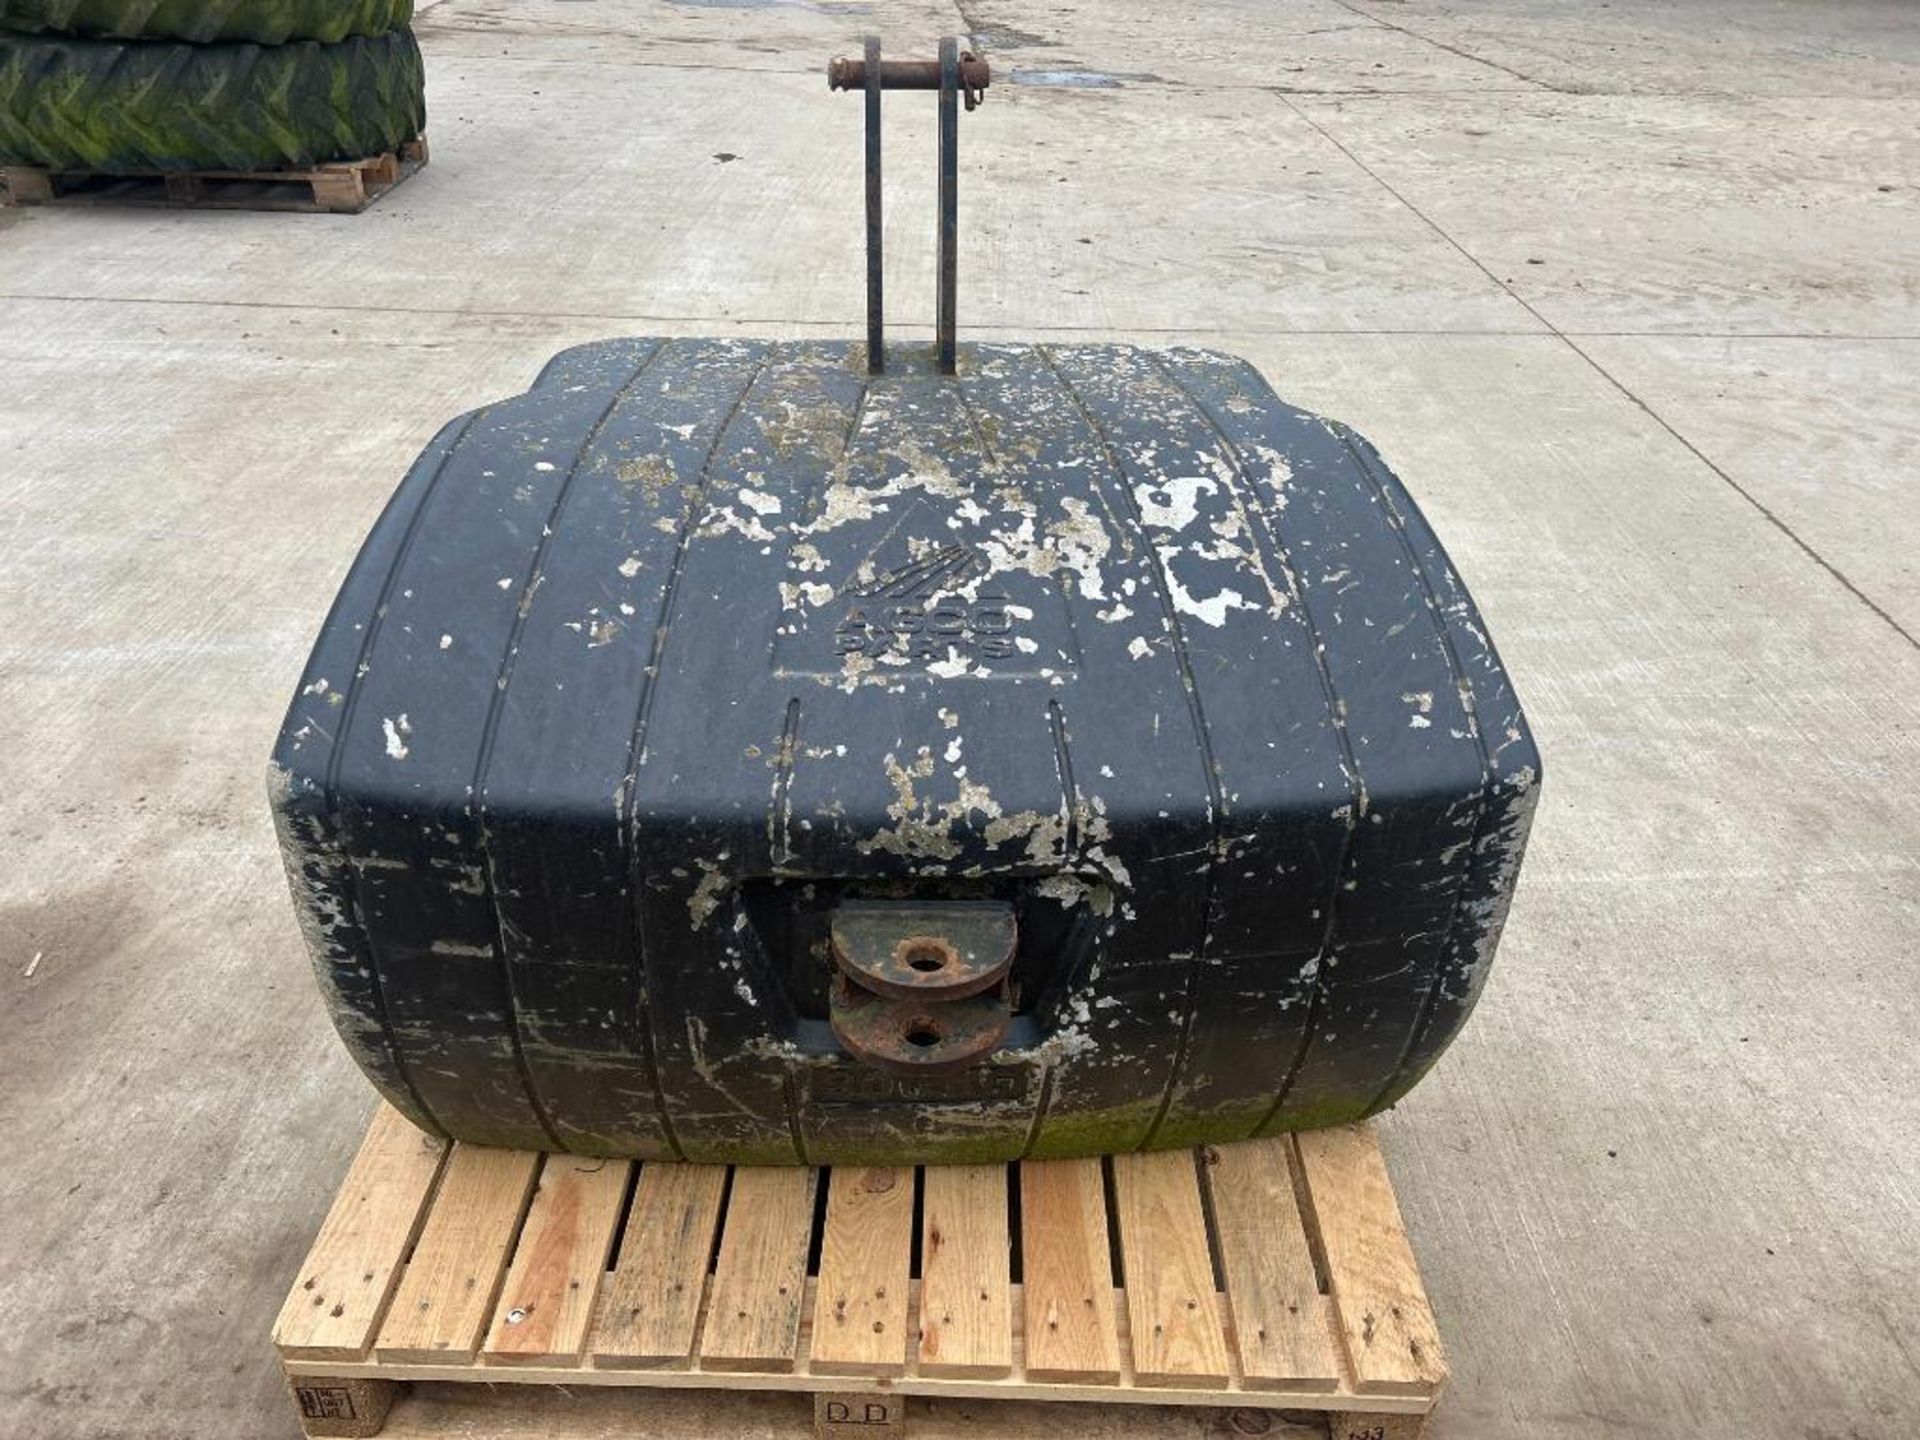 AGCO 900kg concrete weight block - Image 2 of 2